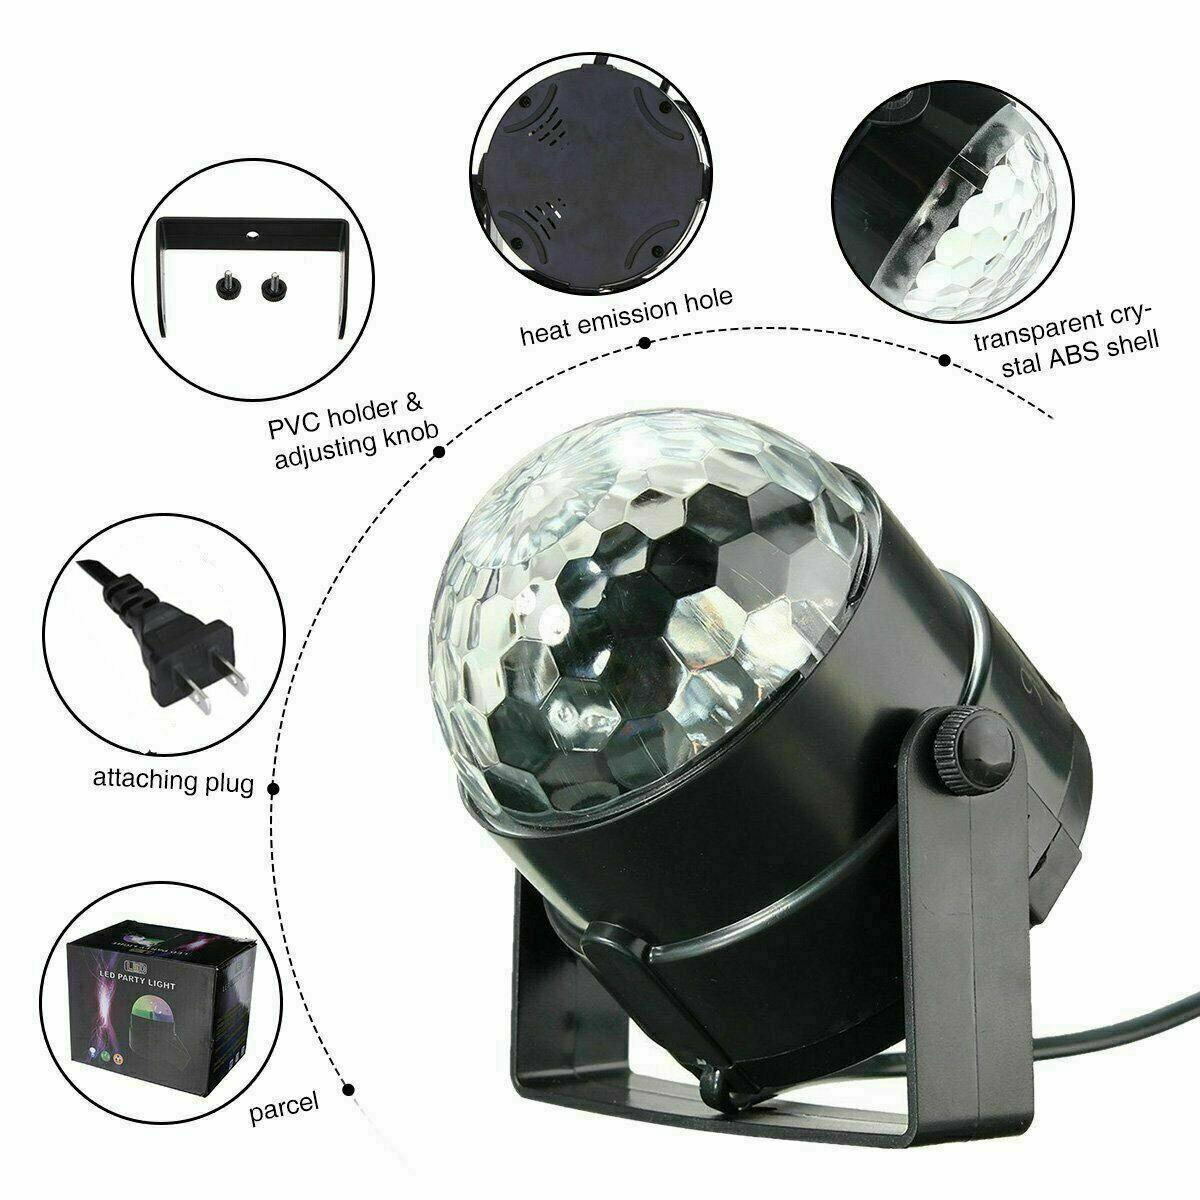 Disco Party Lights Strobe LED DJ Ball Sound Activated Bulb Dance Lamp Decoration-pamma store